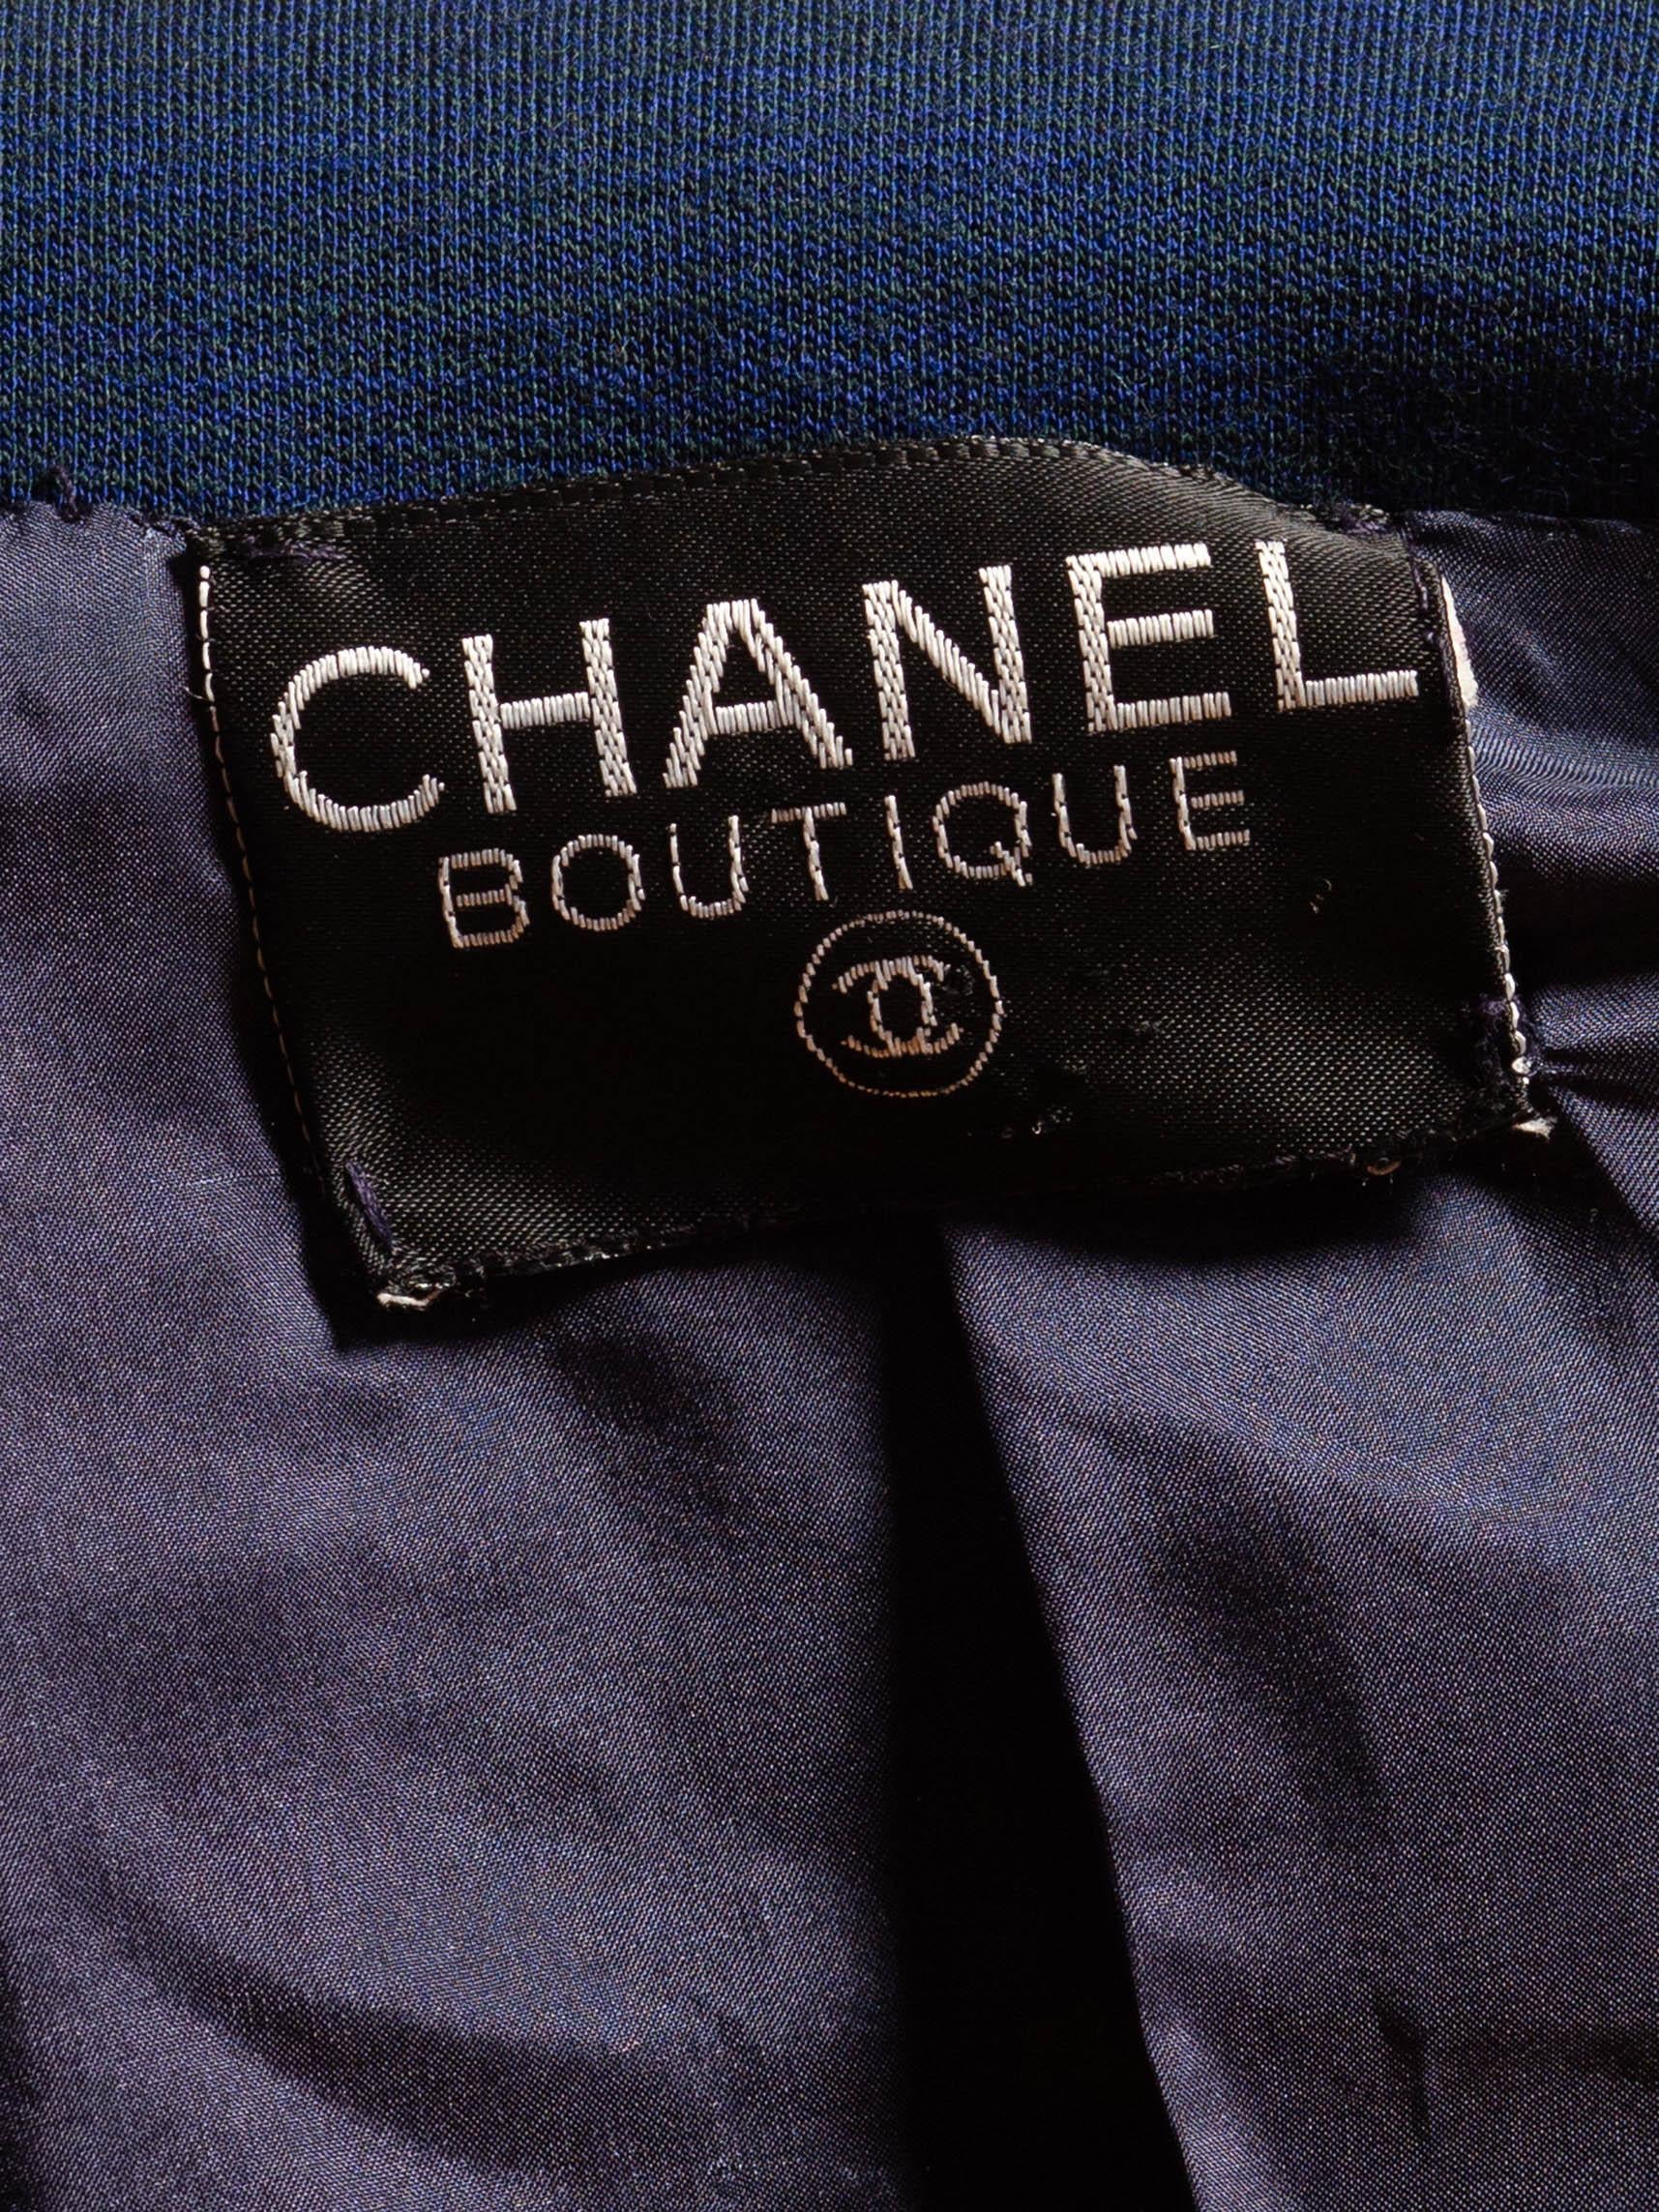 1970S Chanel Navy Blue Wool Blend Jersey Pant Suit With Black Satin Trim & Gold Buttons